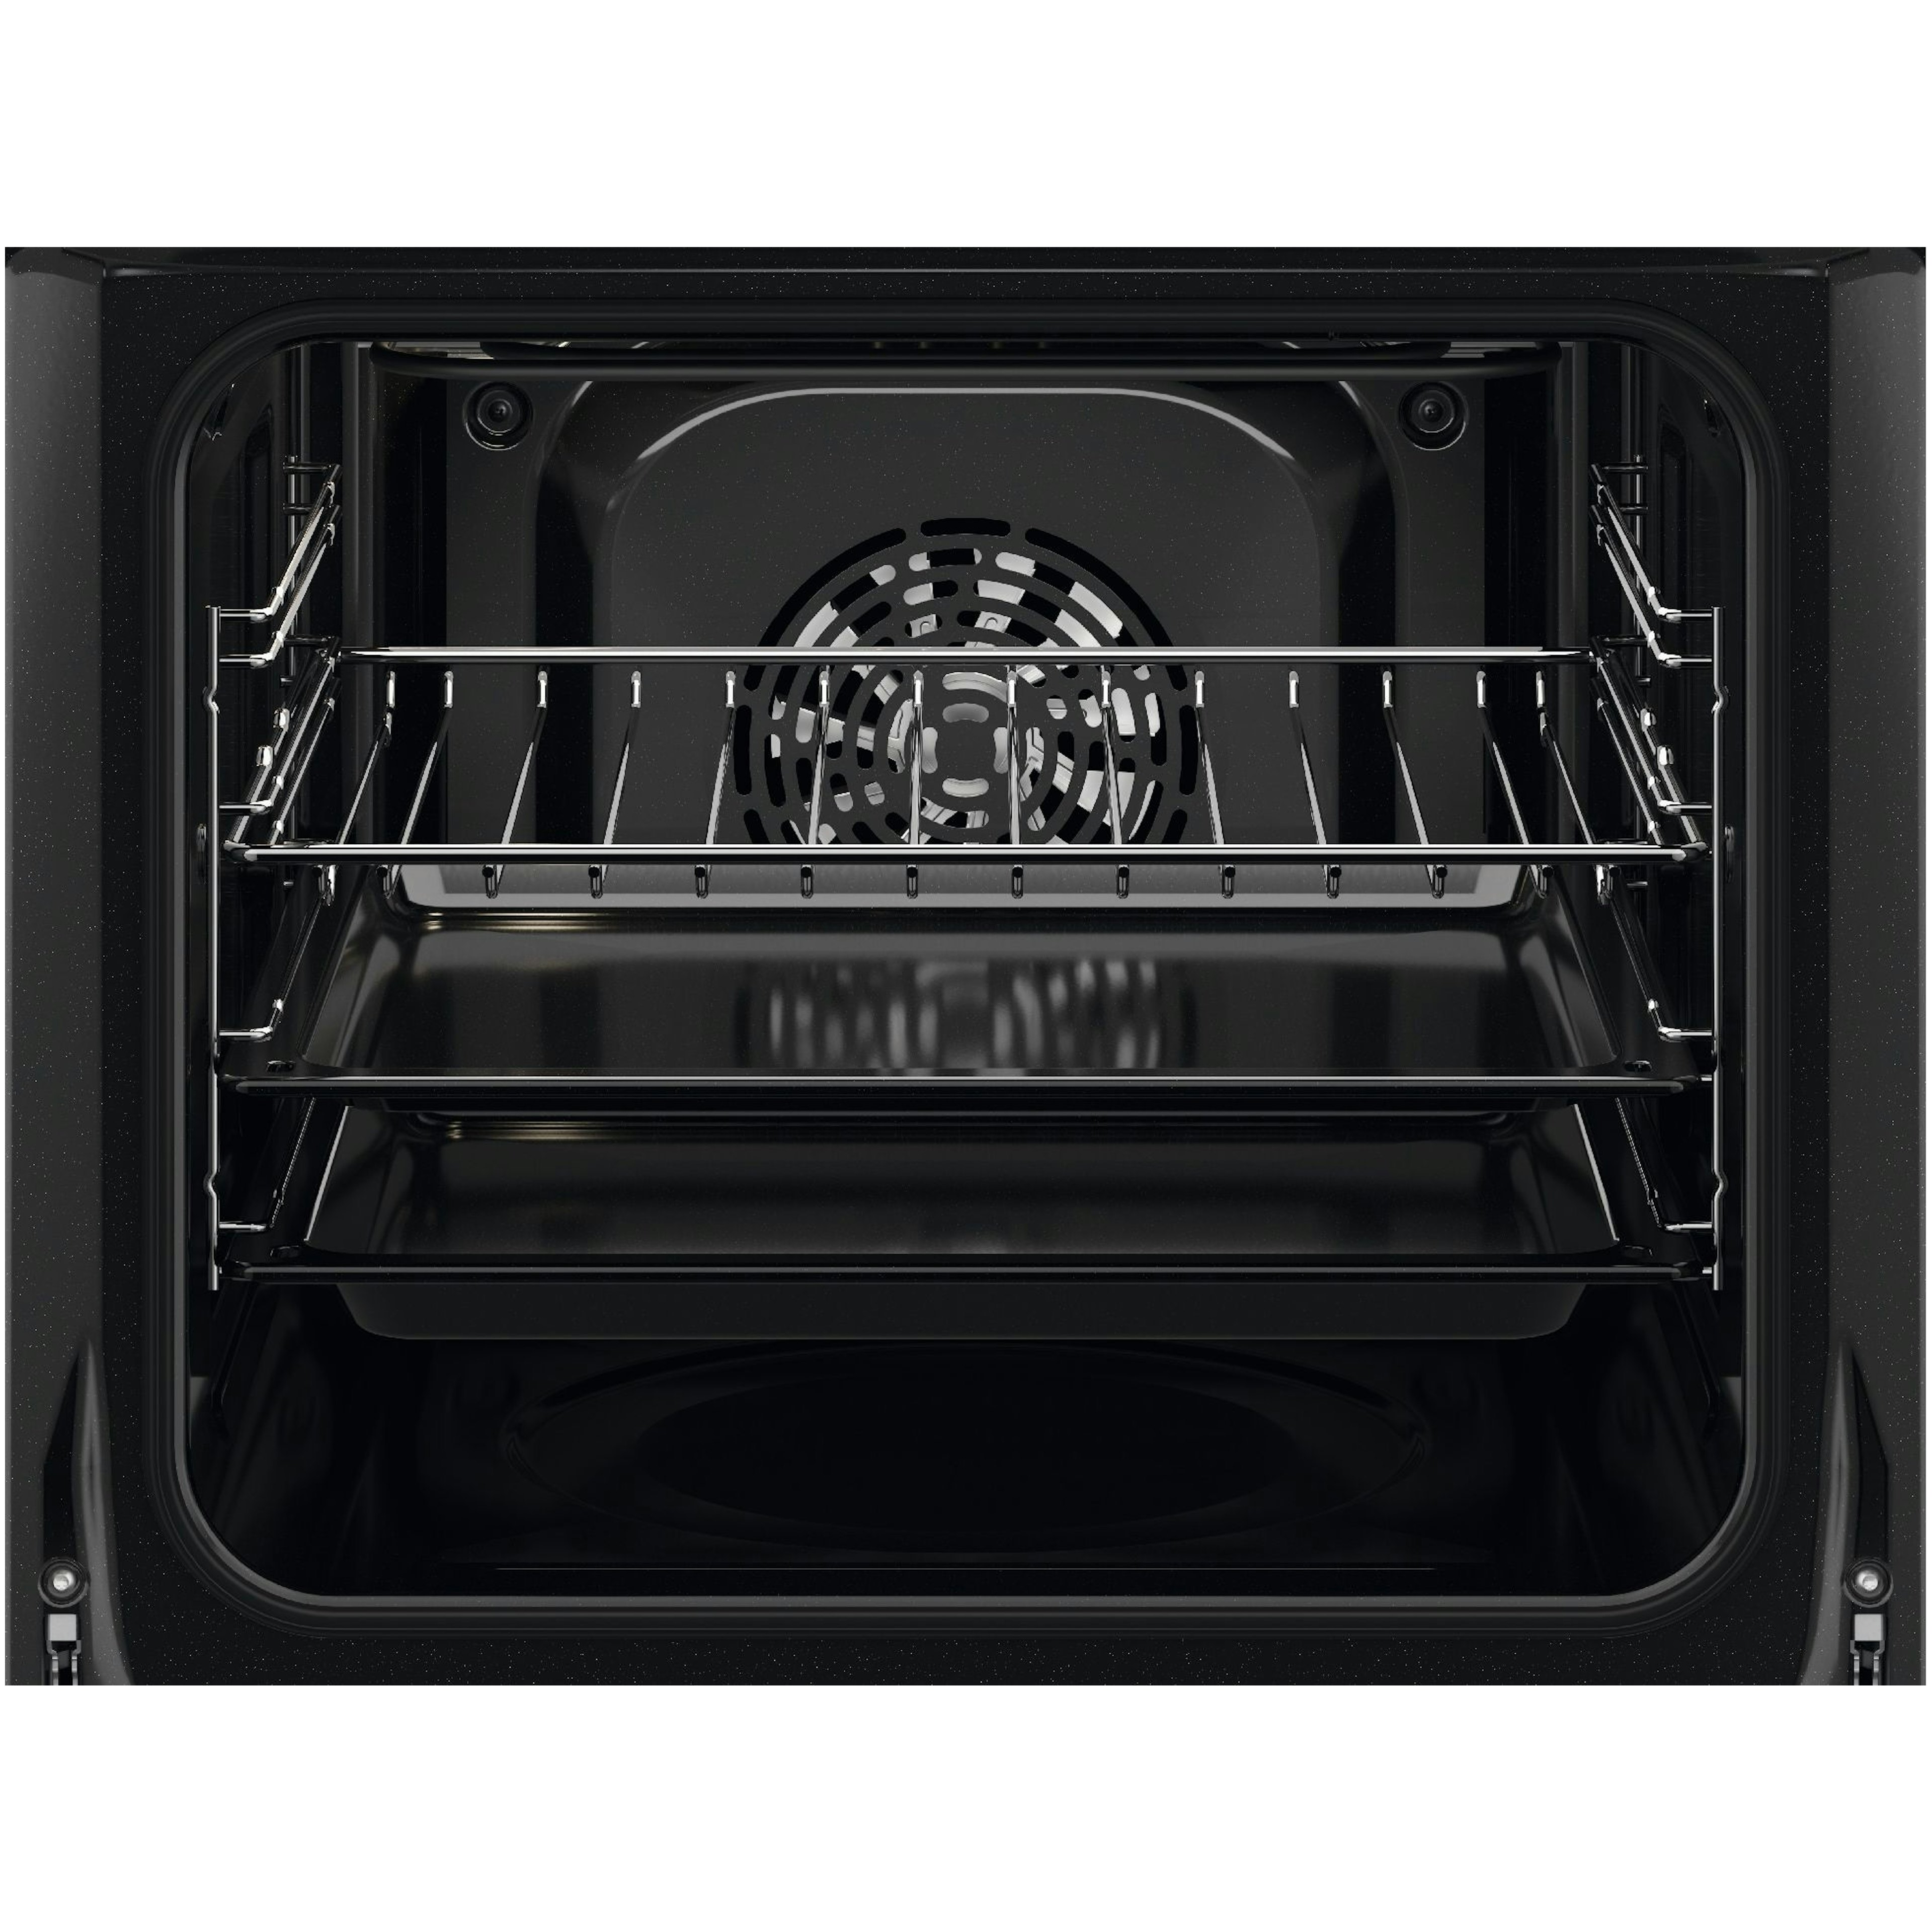 Electrolux oven KODGH40BX afbeelding 3